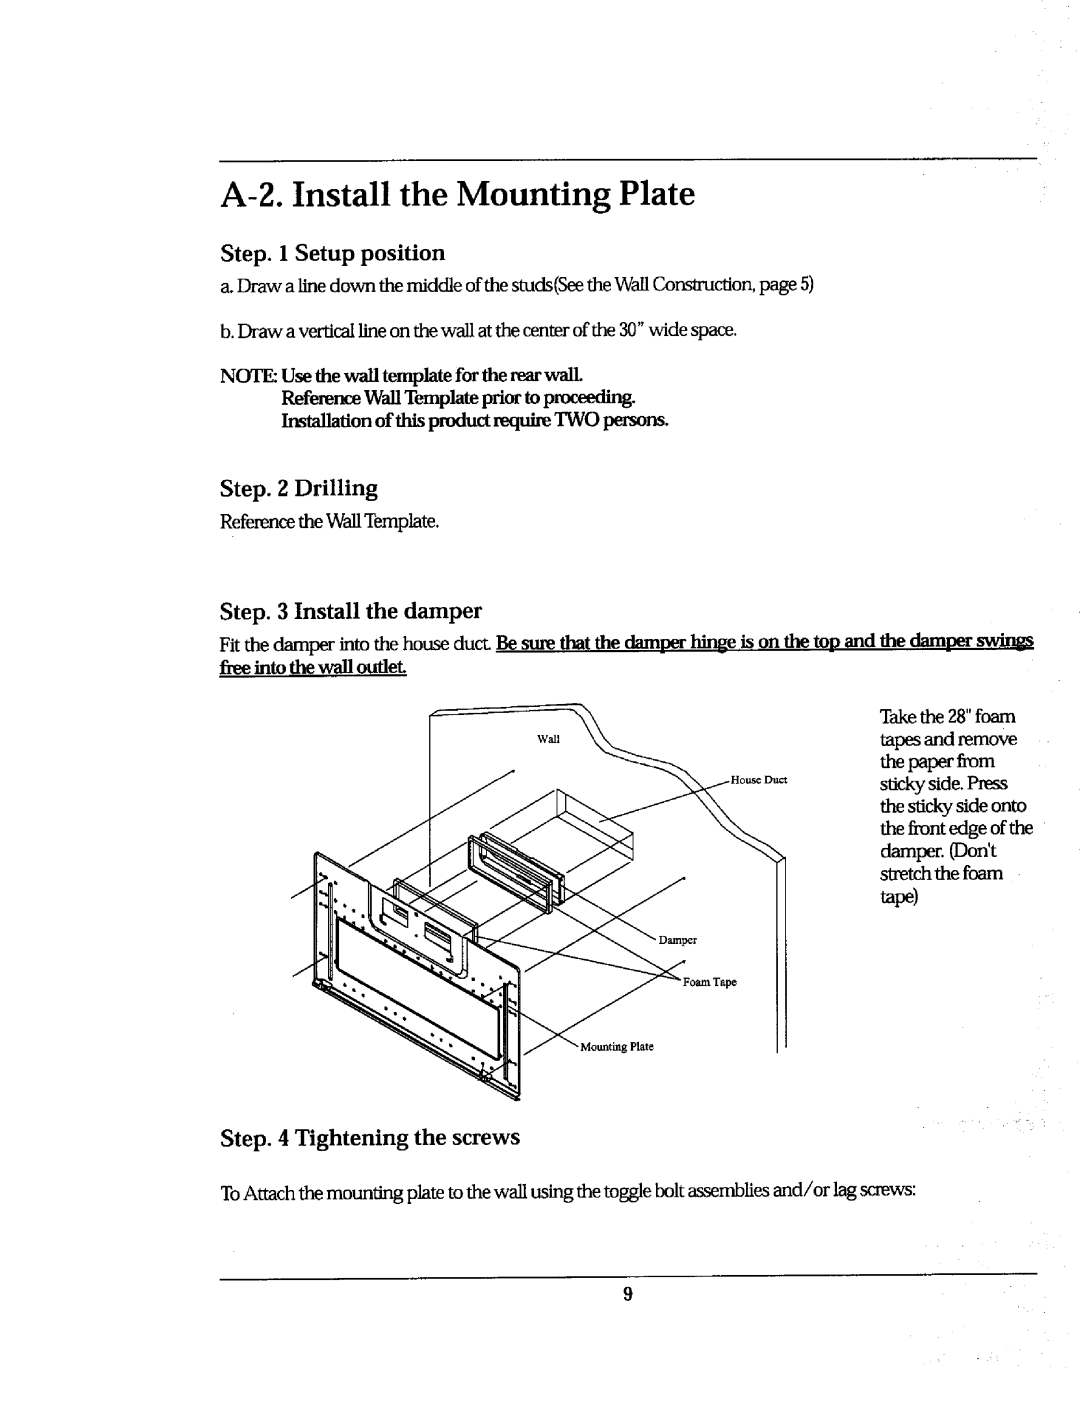 Whirlpool Ni-l30 A-2.Install the Mounting Plate, Step. 1 Setup position, Step. 2 Drilling, Step. 3 Install the damper 